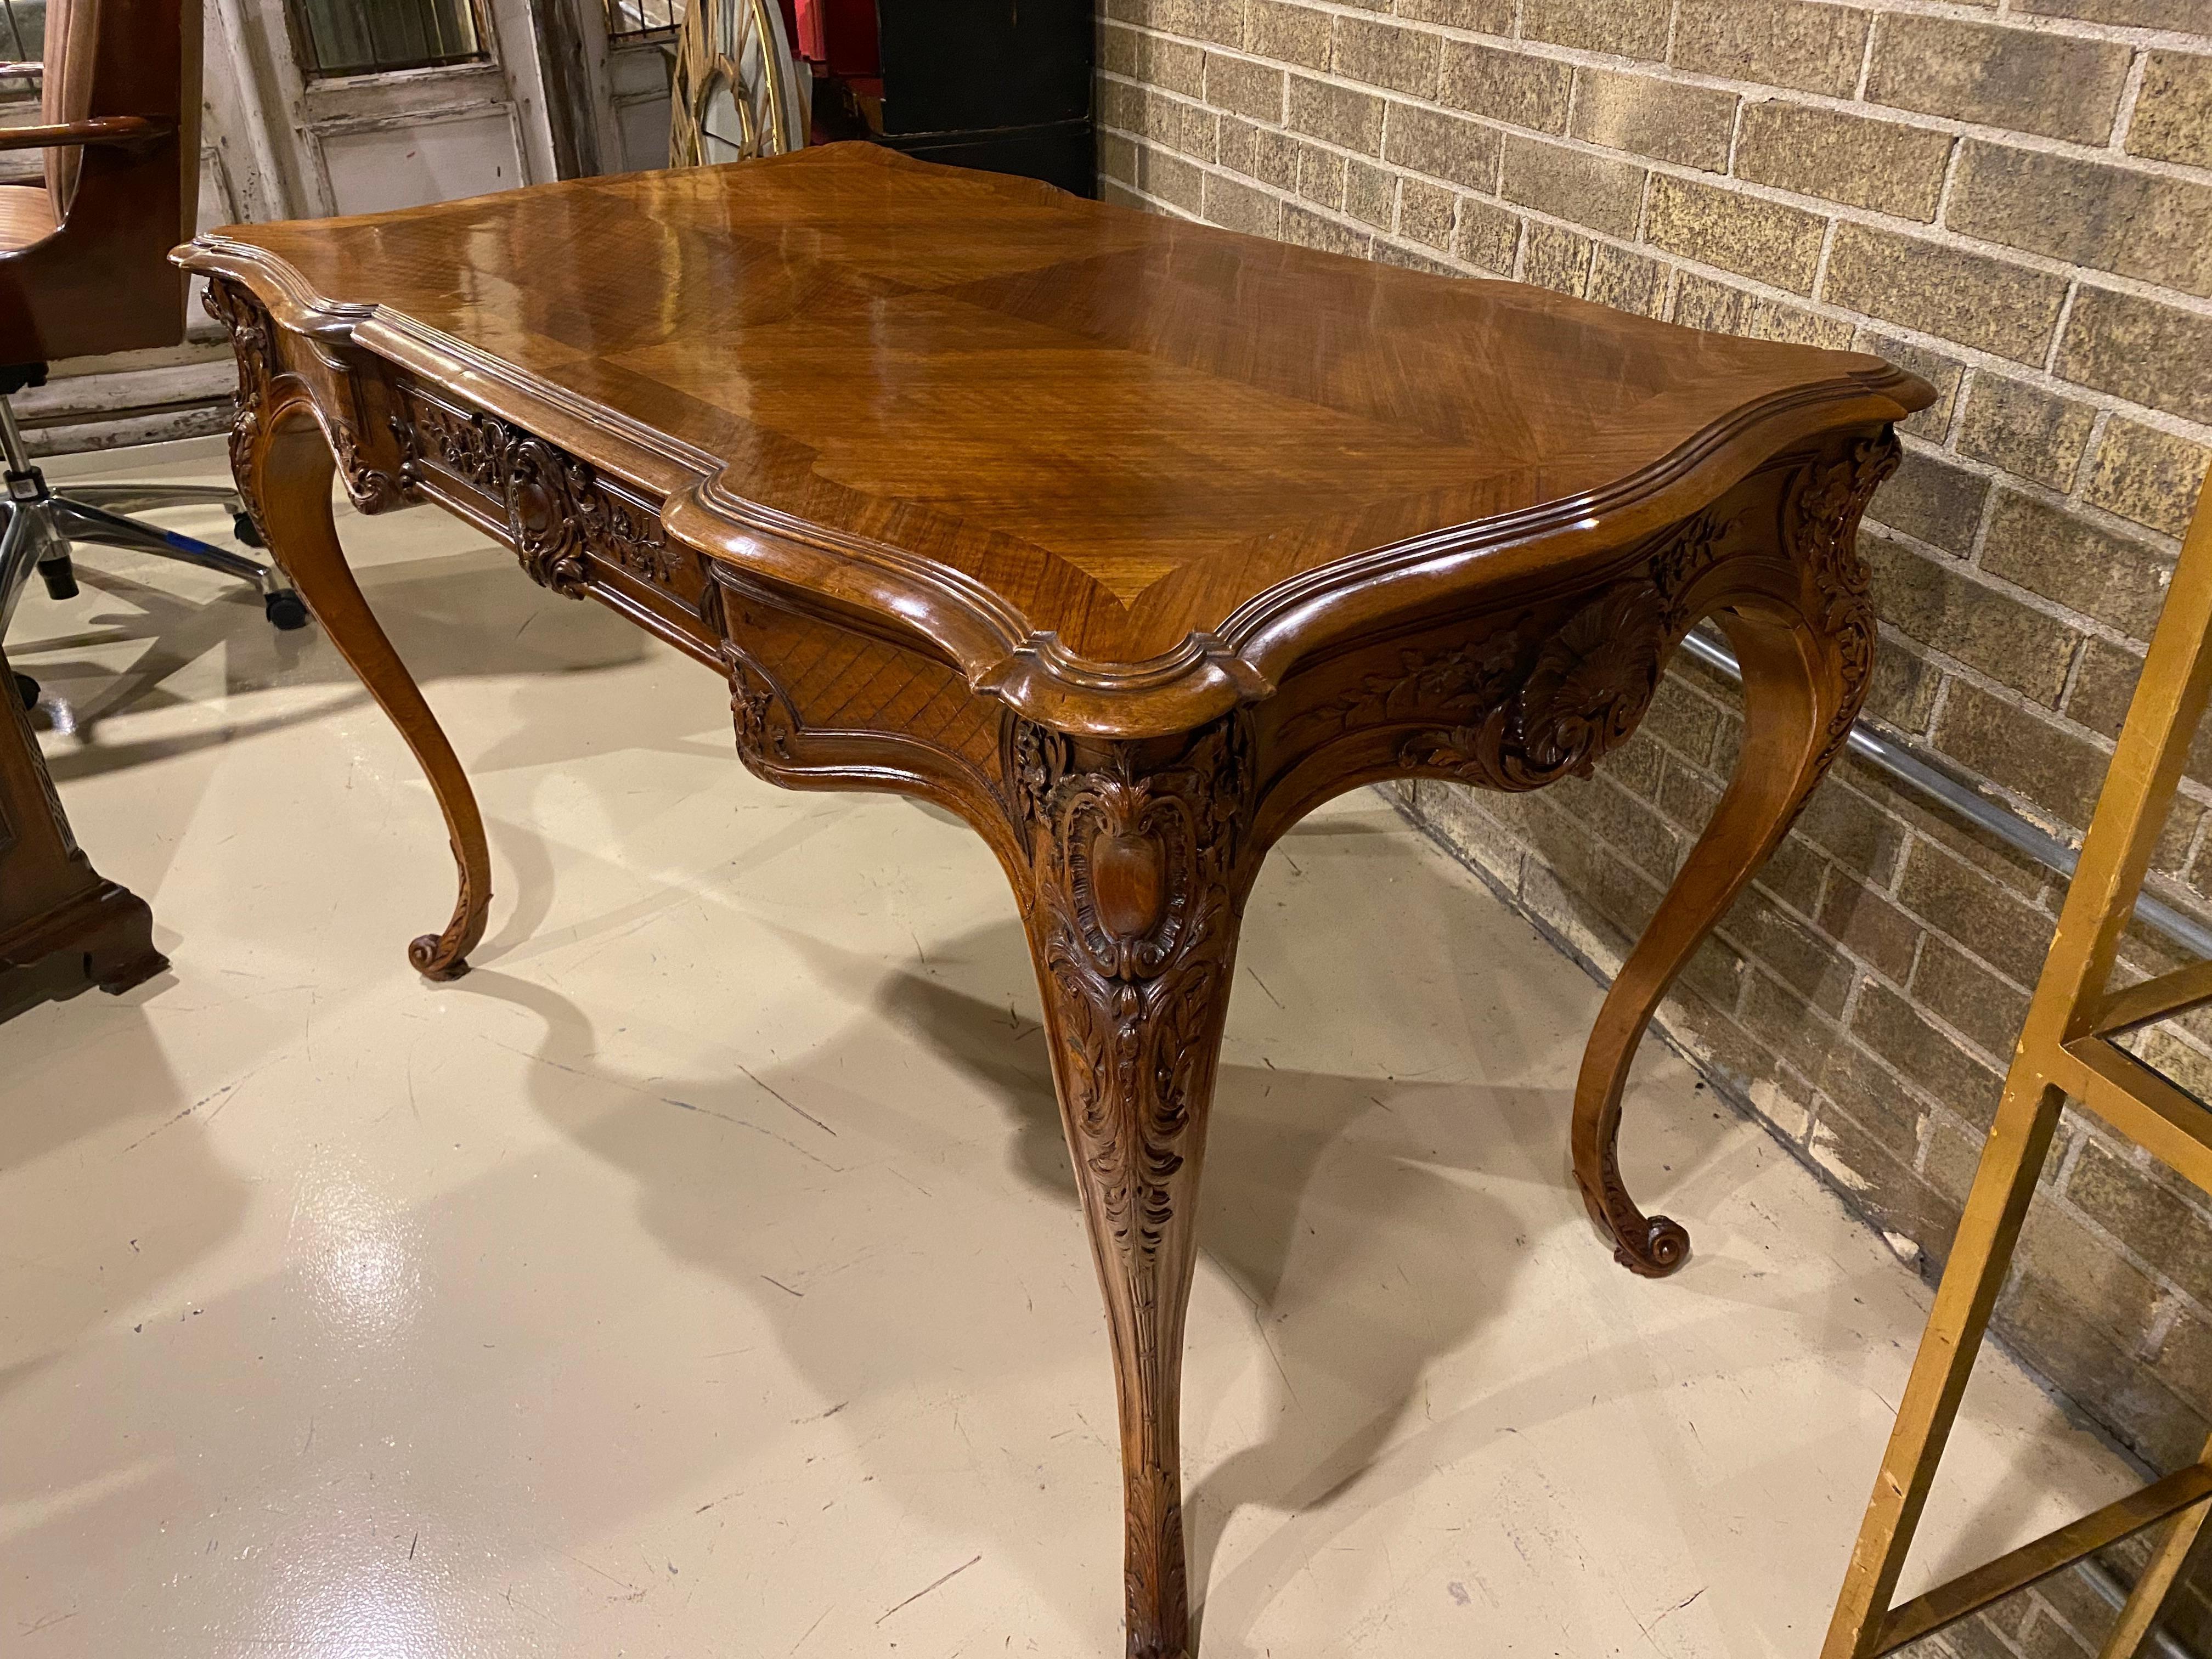 A beautifully proportioned 19th century French style writing table or desk, crafted in walnut with a lovely pattern walnut top with a walnut edge band. The carving is nicely detailed around the apron of the table and conceals one drawer that has a